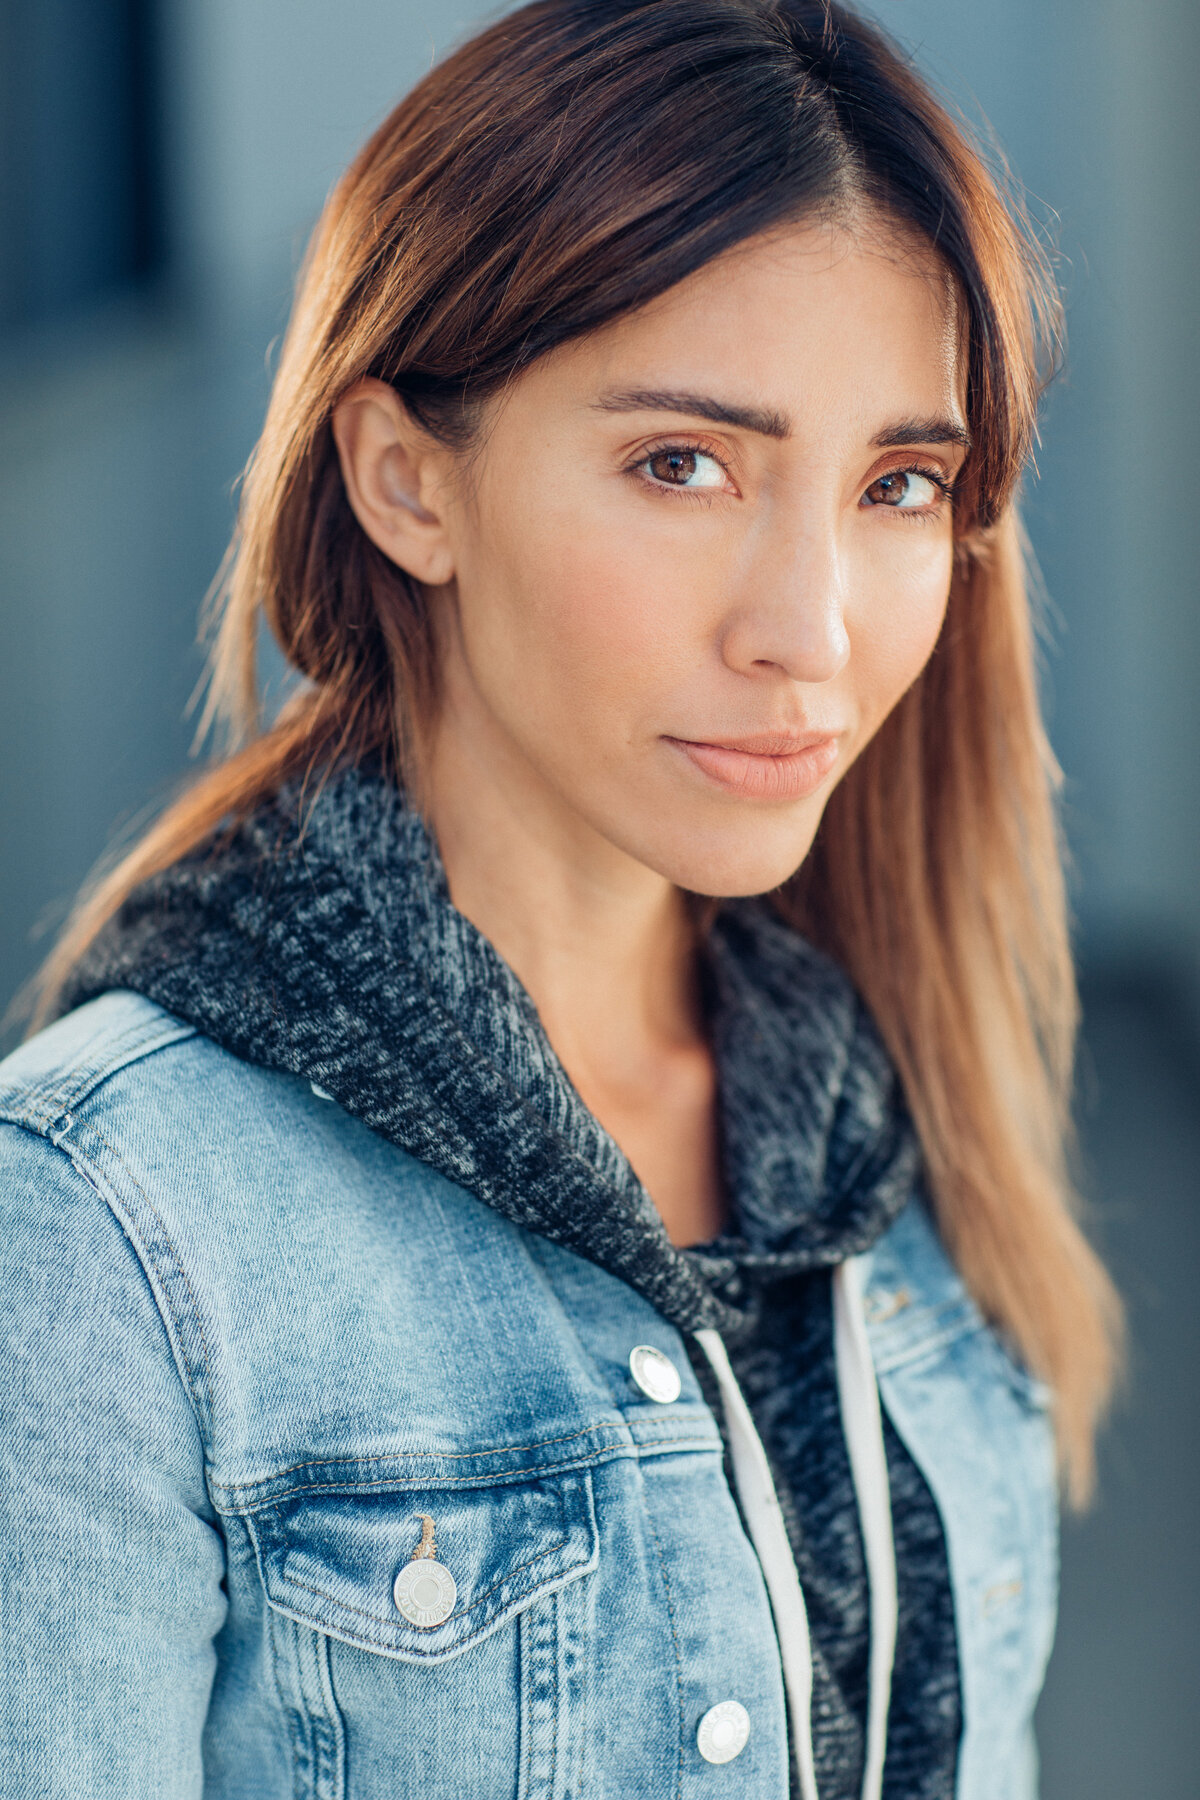 Headshot Photograph Of Young Woman In Outer Blue Denim Jacket And Inner Black Hoodie Los Angeles